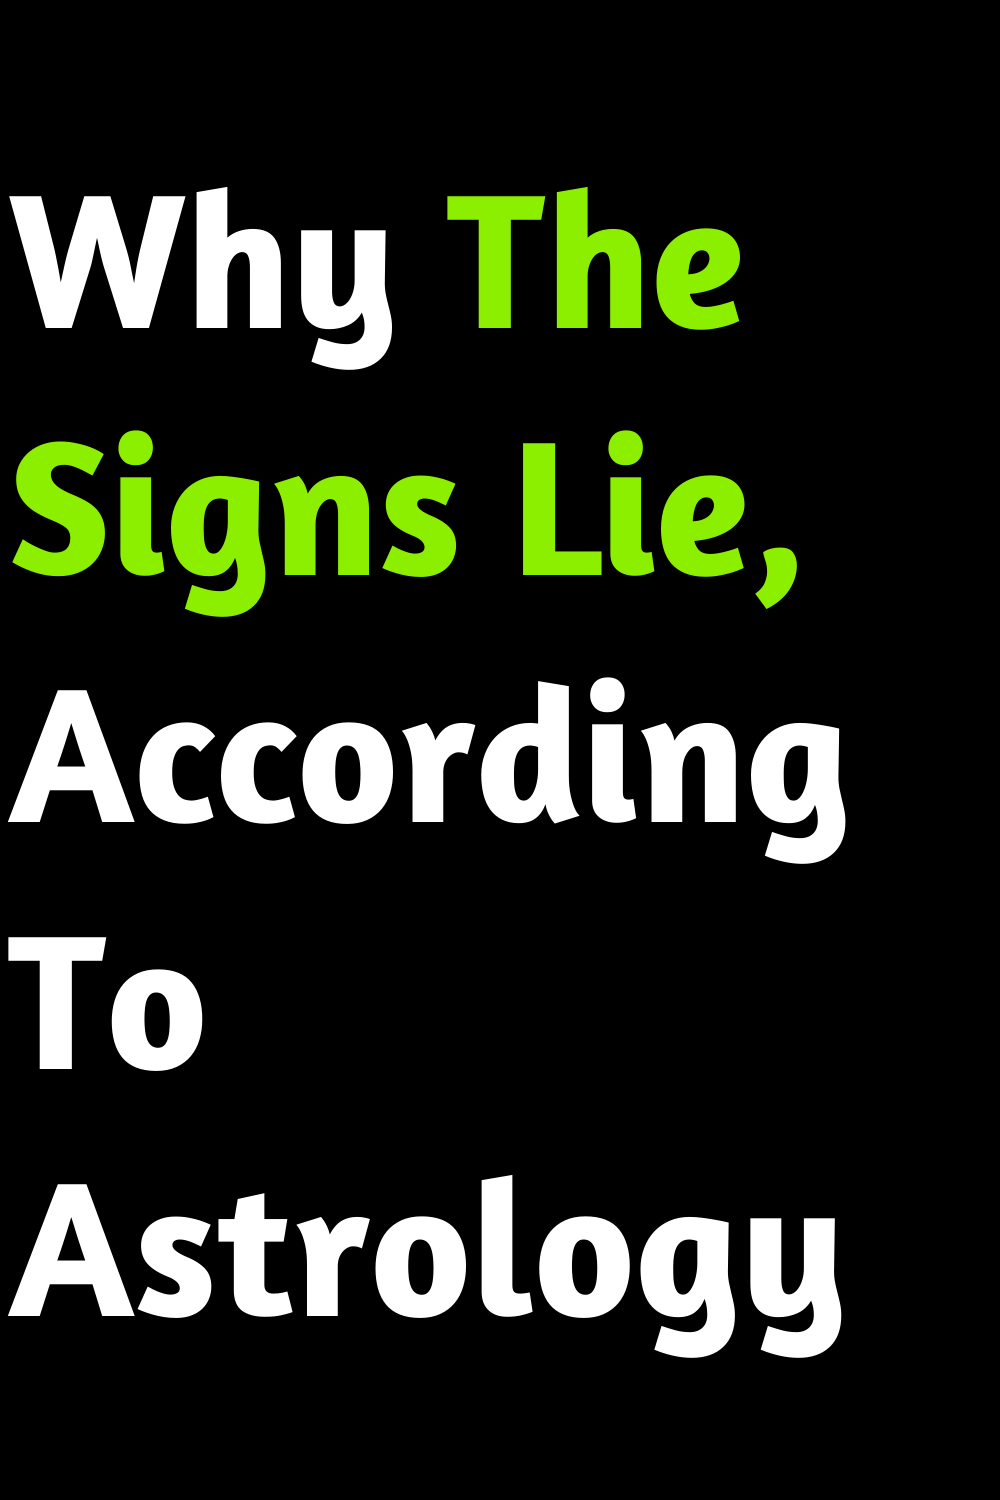 Why The Signs Lie, According To Astrology